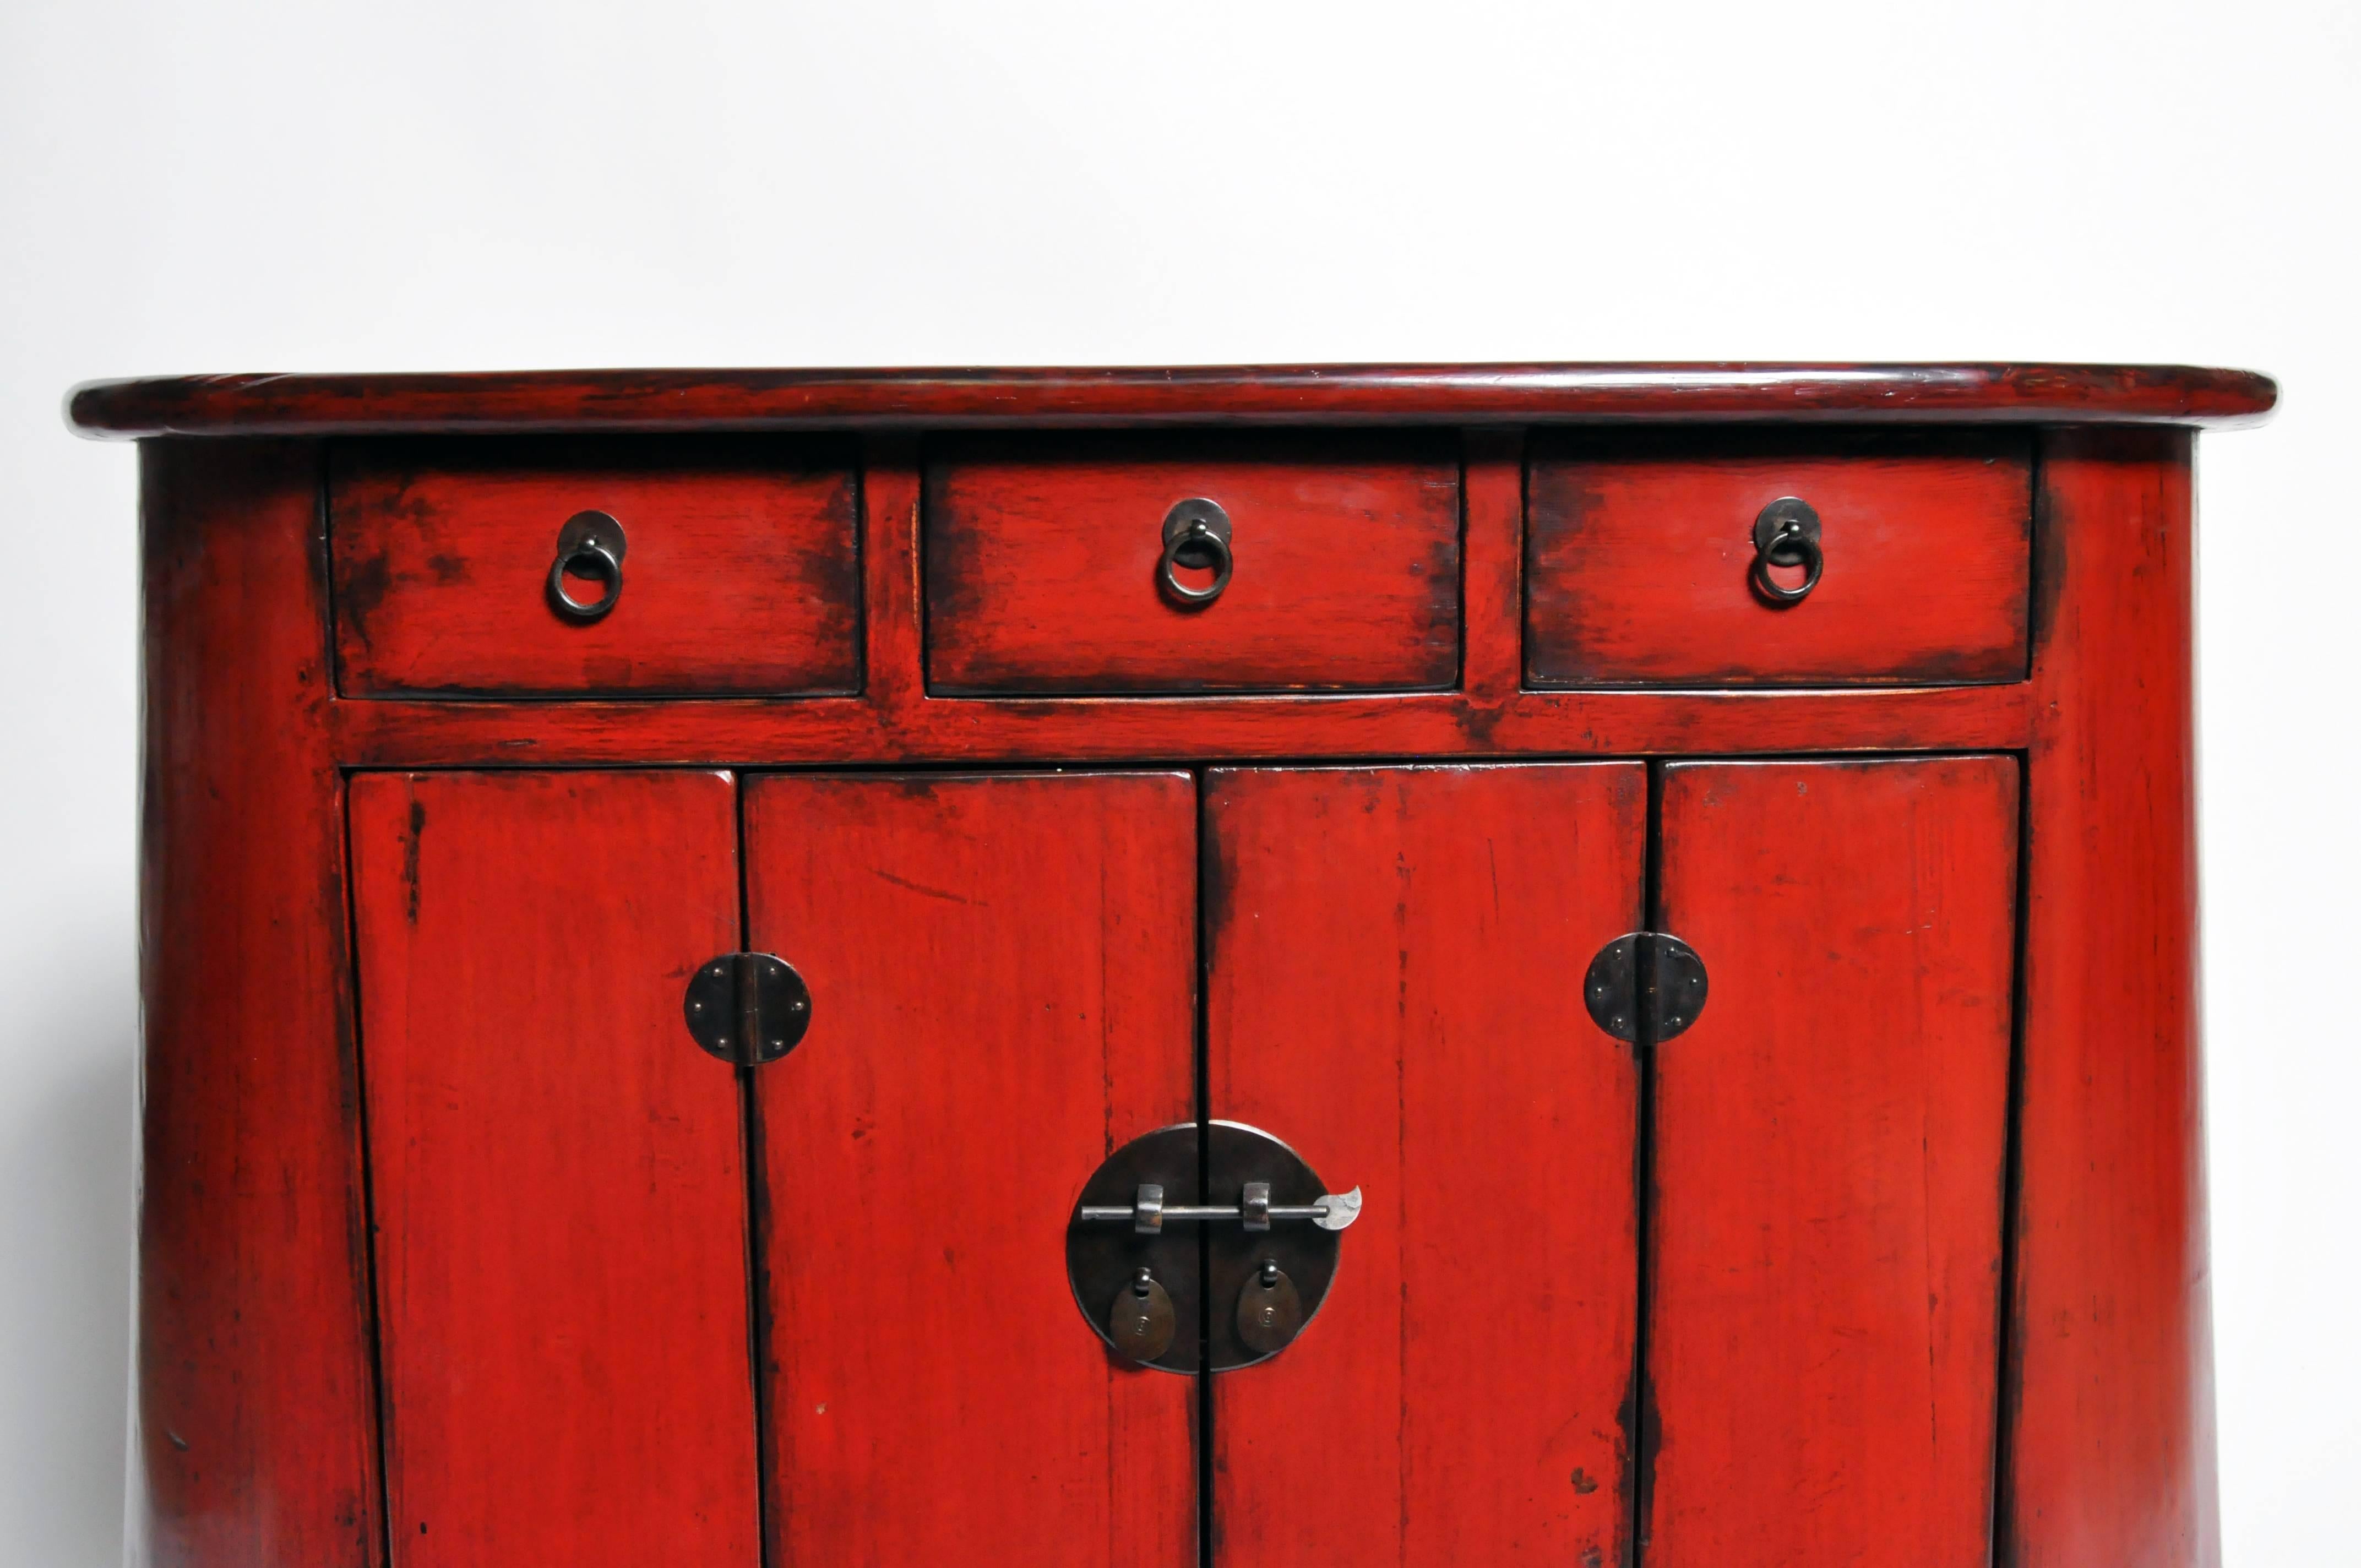 Contemporary Red-Lacquered Chinese Oval Chest with Three Drawers and a Shelf